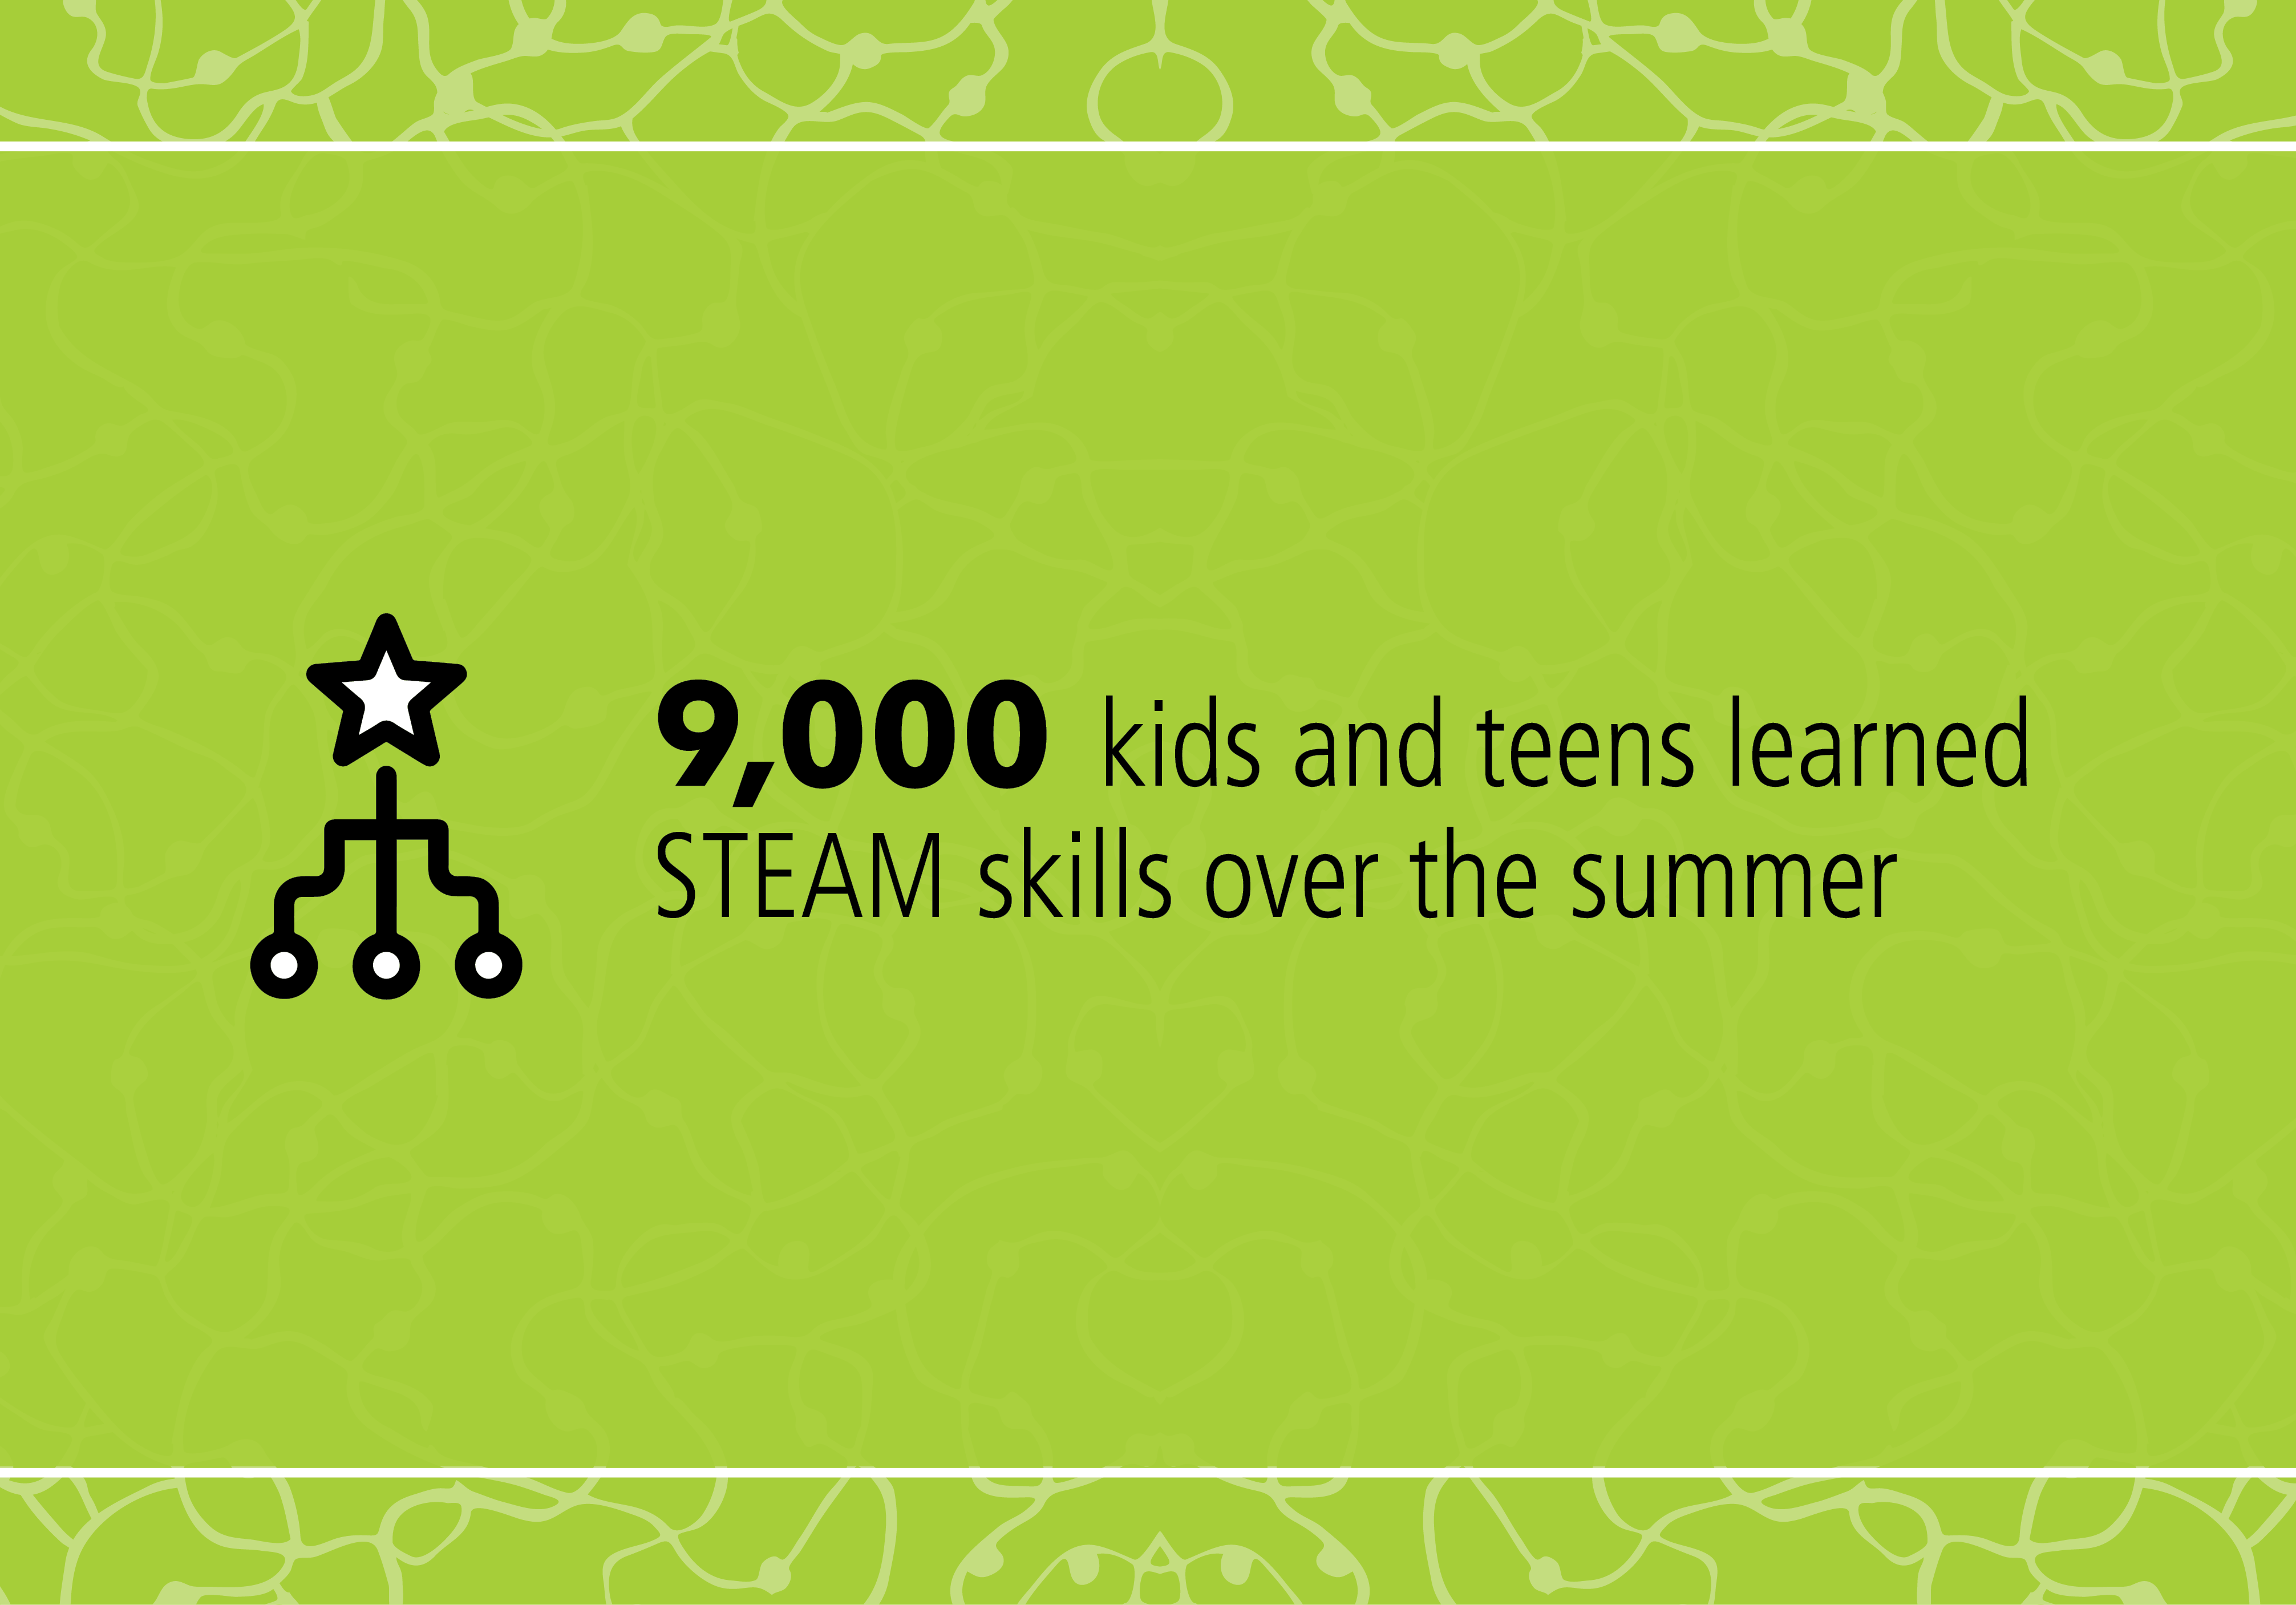 9,000 kids and teens learned STEAM skills over the summer